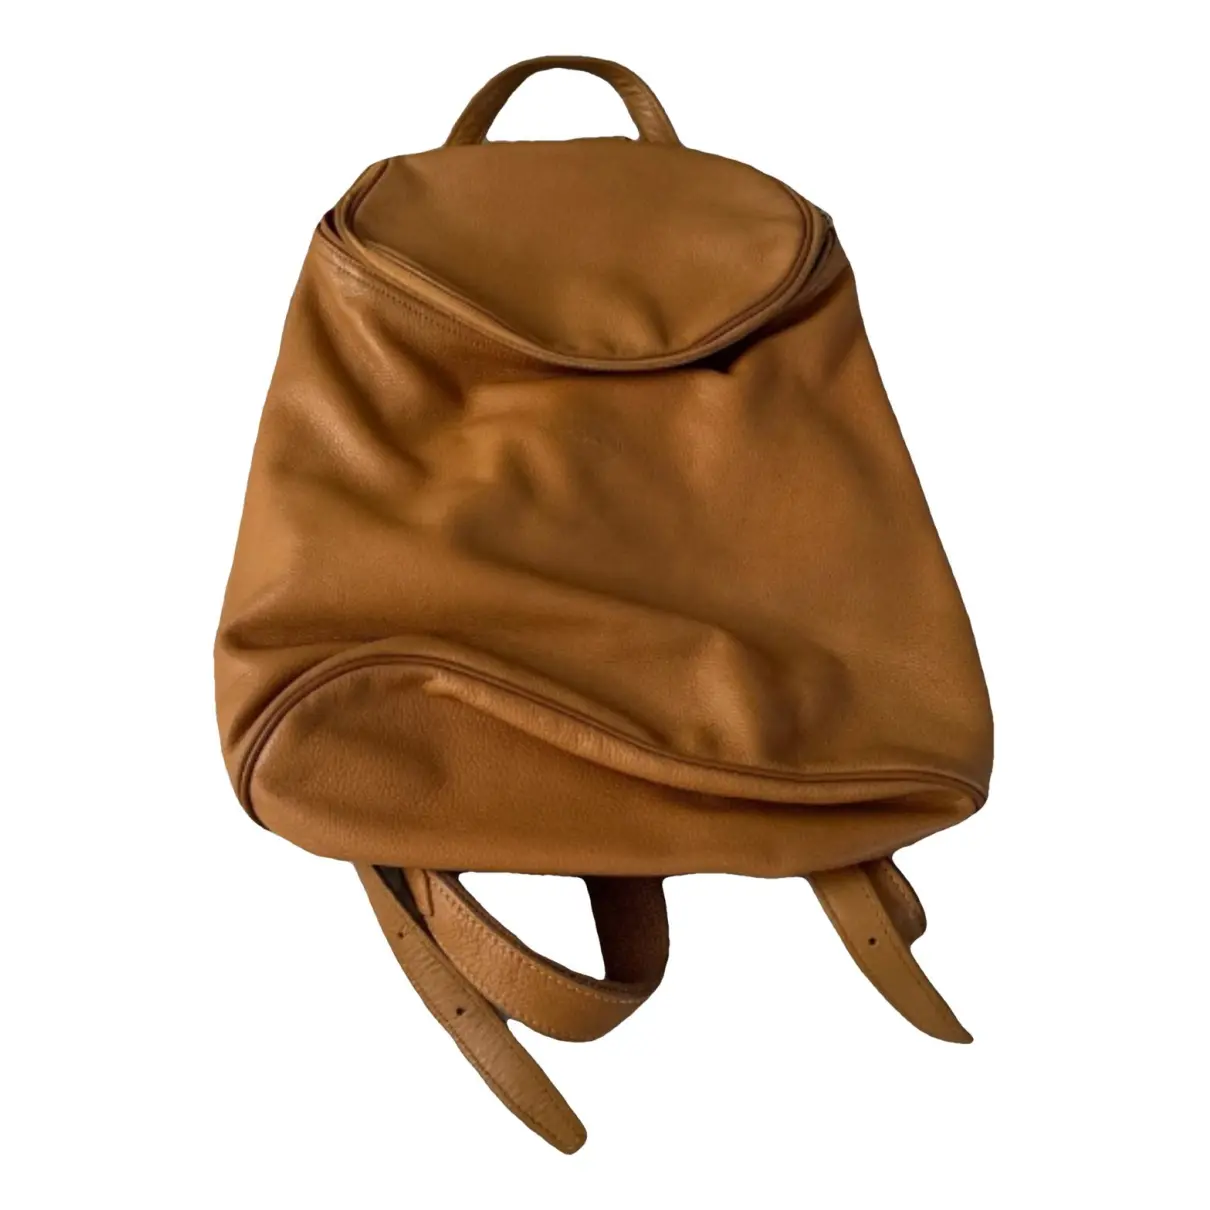 Foulonné leather backpack